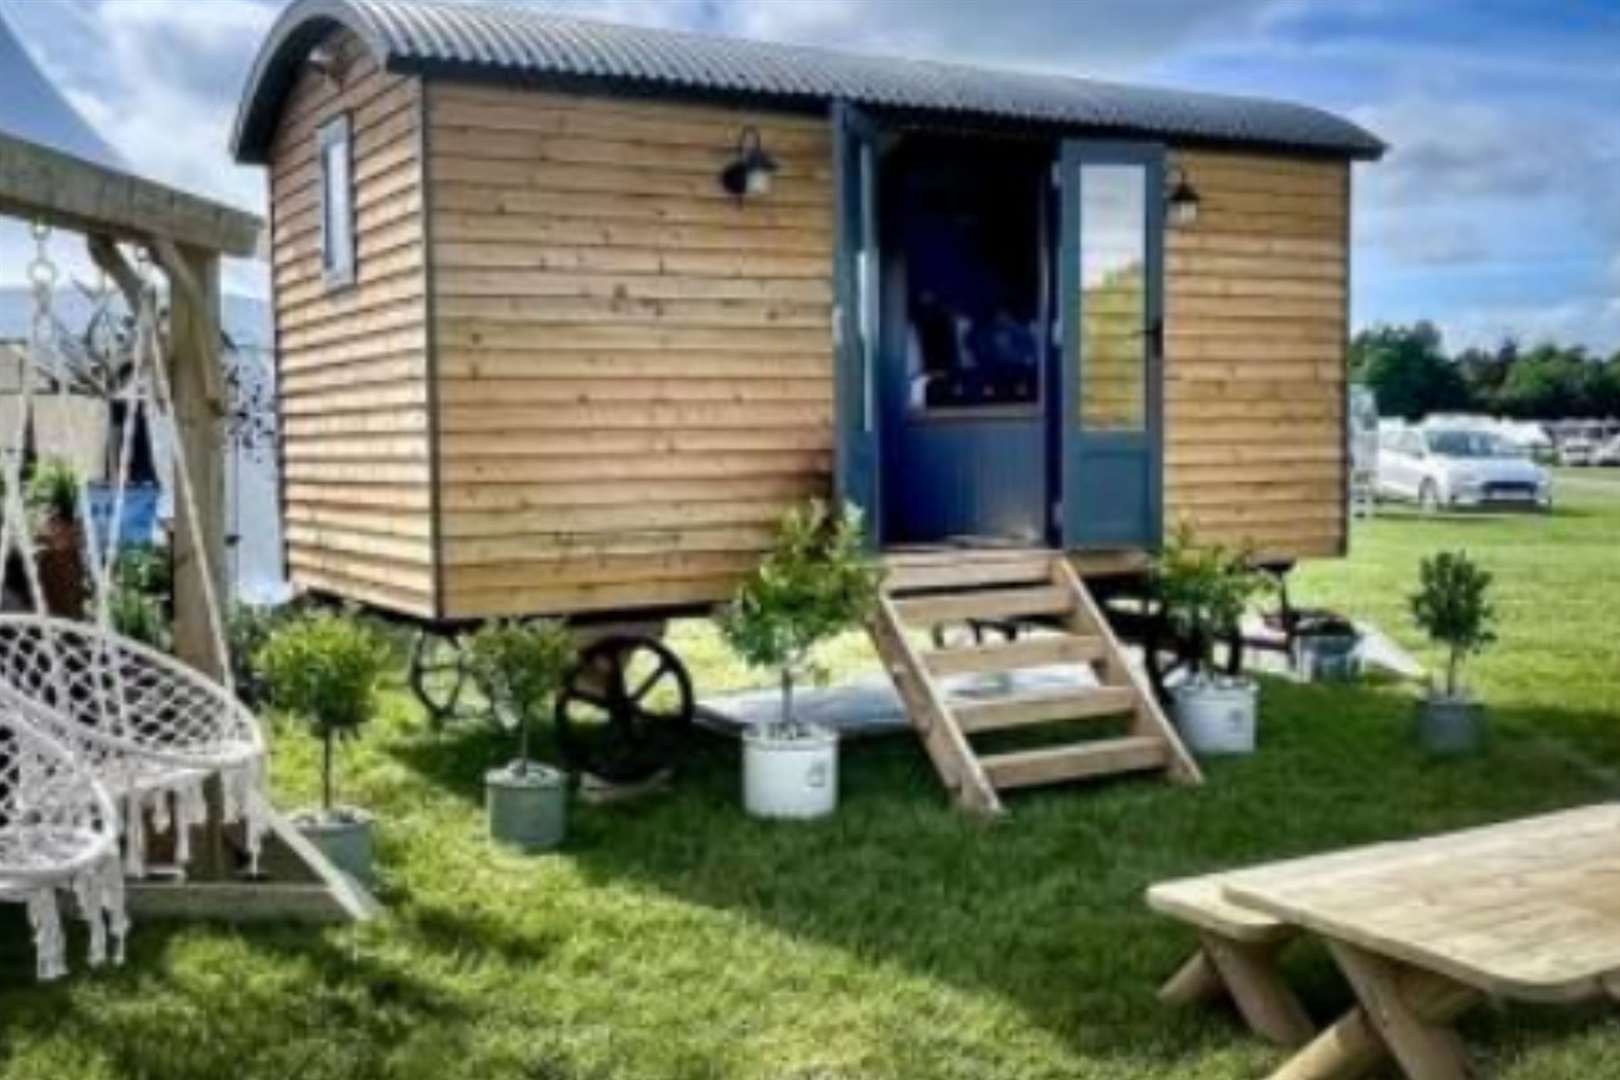 The site would include shepherd huts for guest accommodation. Pictured is how the huts could look. Picture: DDC planning